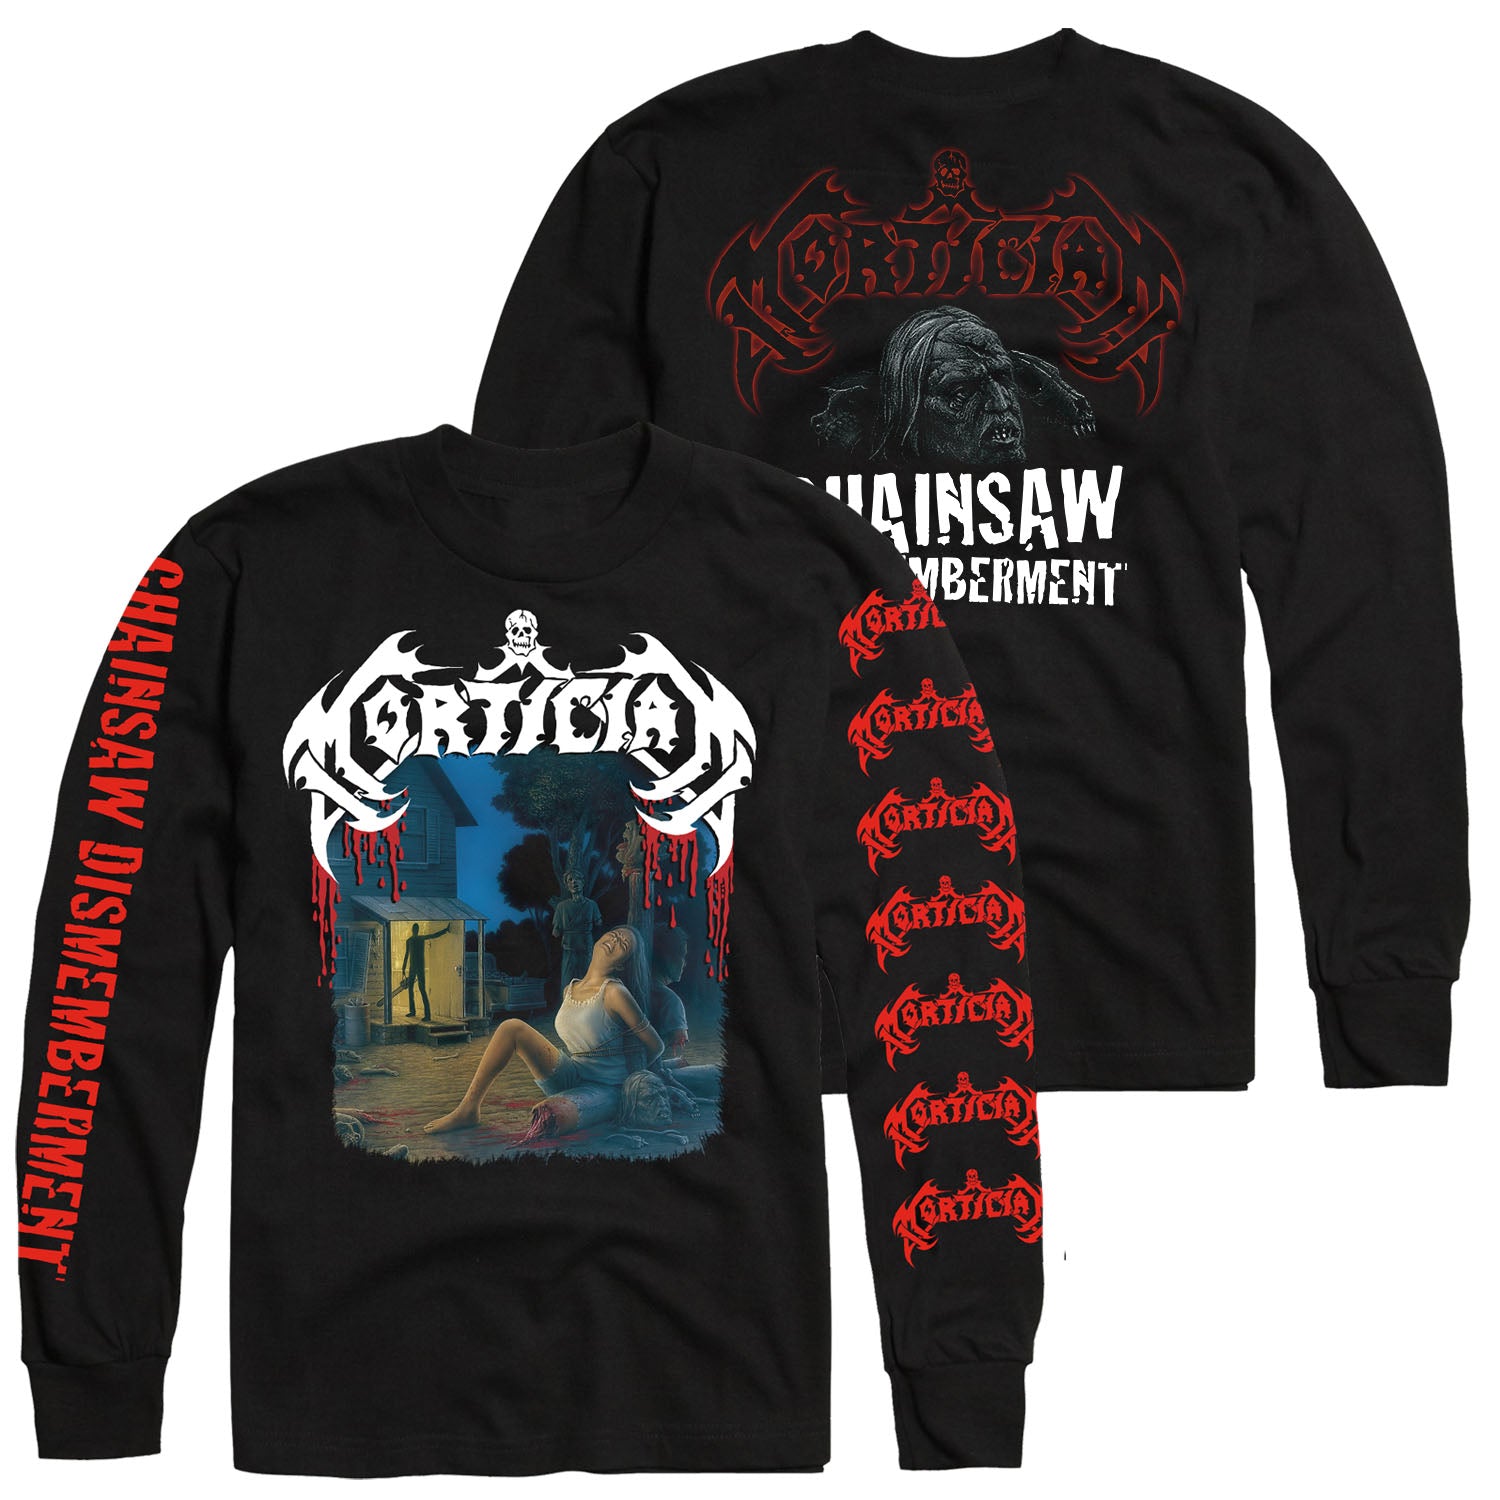 Mortician "Chainsaw Dismemberment" Longsleeve